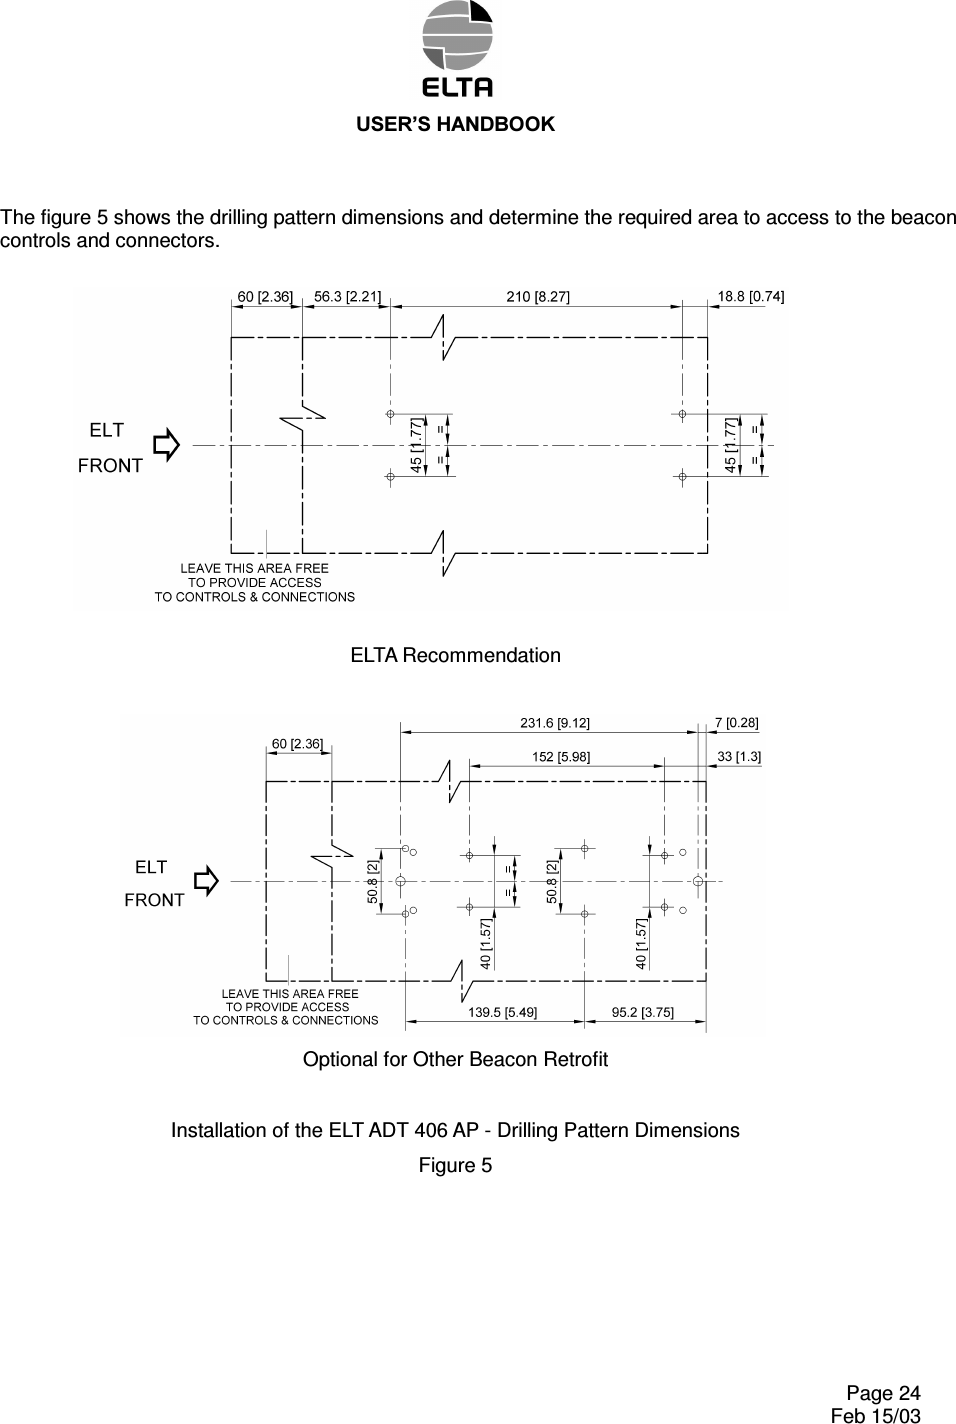 86(5¶6+$1&apos;%22.    Page 24   Feb 15/03 The figure 5 shows the drilling pattern dimensions and determine the required area to access to the beacon controls and connectors. ELTA Recommendation  Optional for Other Beacon Retrofit  Installation of the ELT ADT 406 AP - Drilling Pattern Dimensions Figure 5  